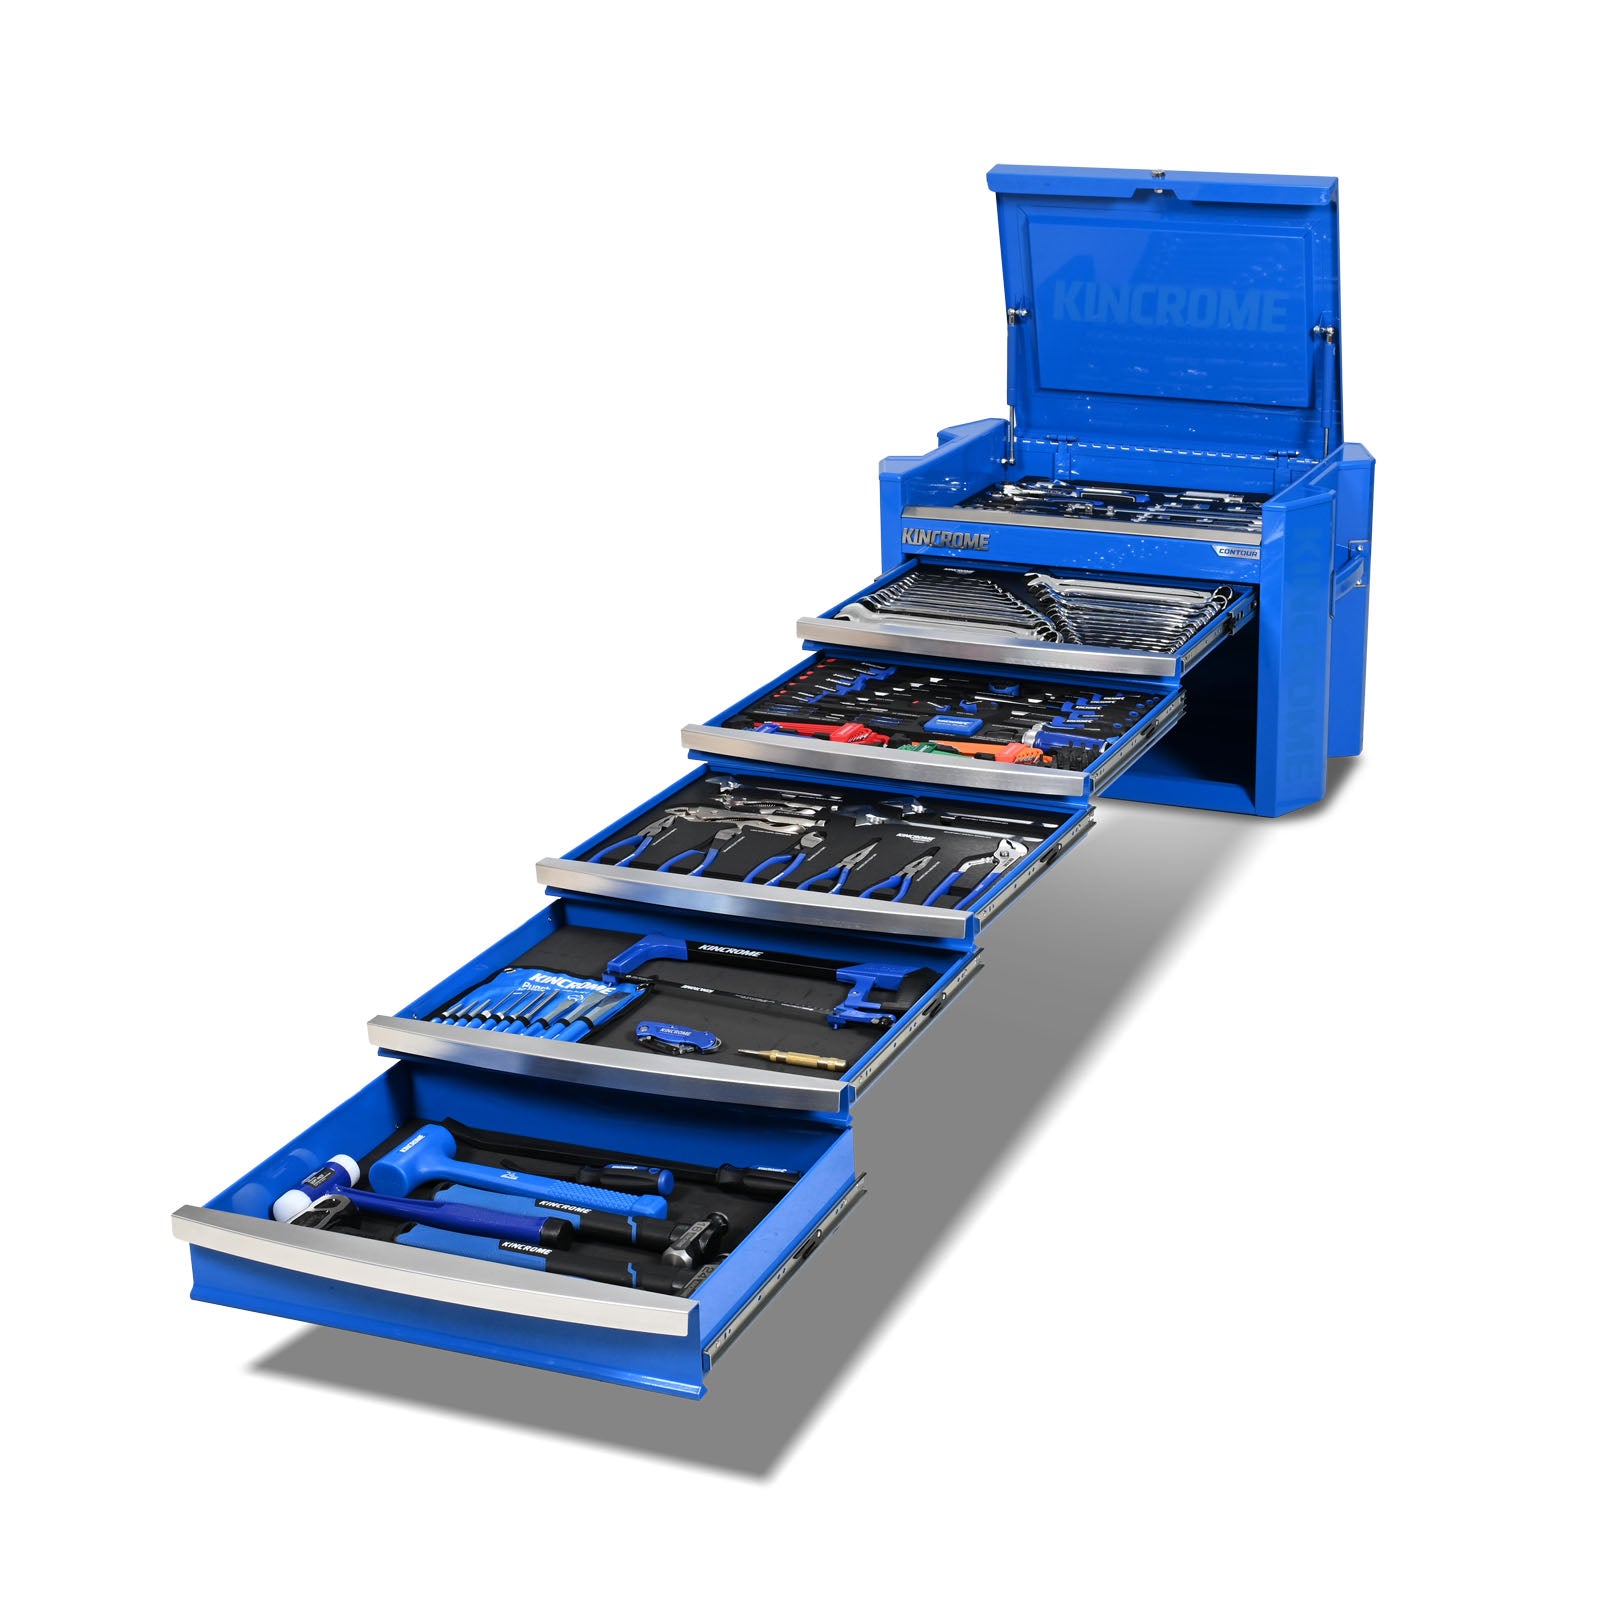 277Pce Blue Tool Chest Kit K1942 by Kincrome